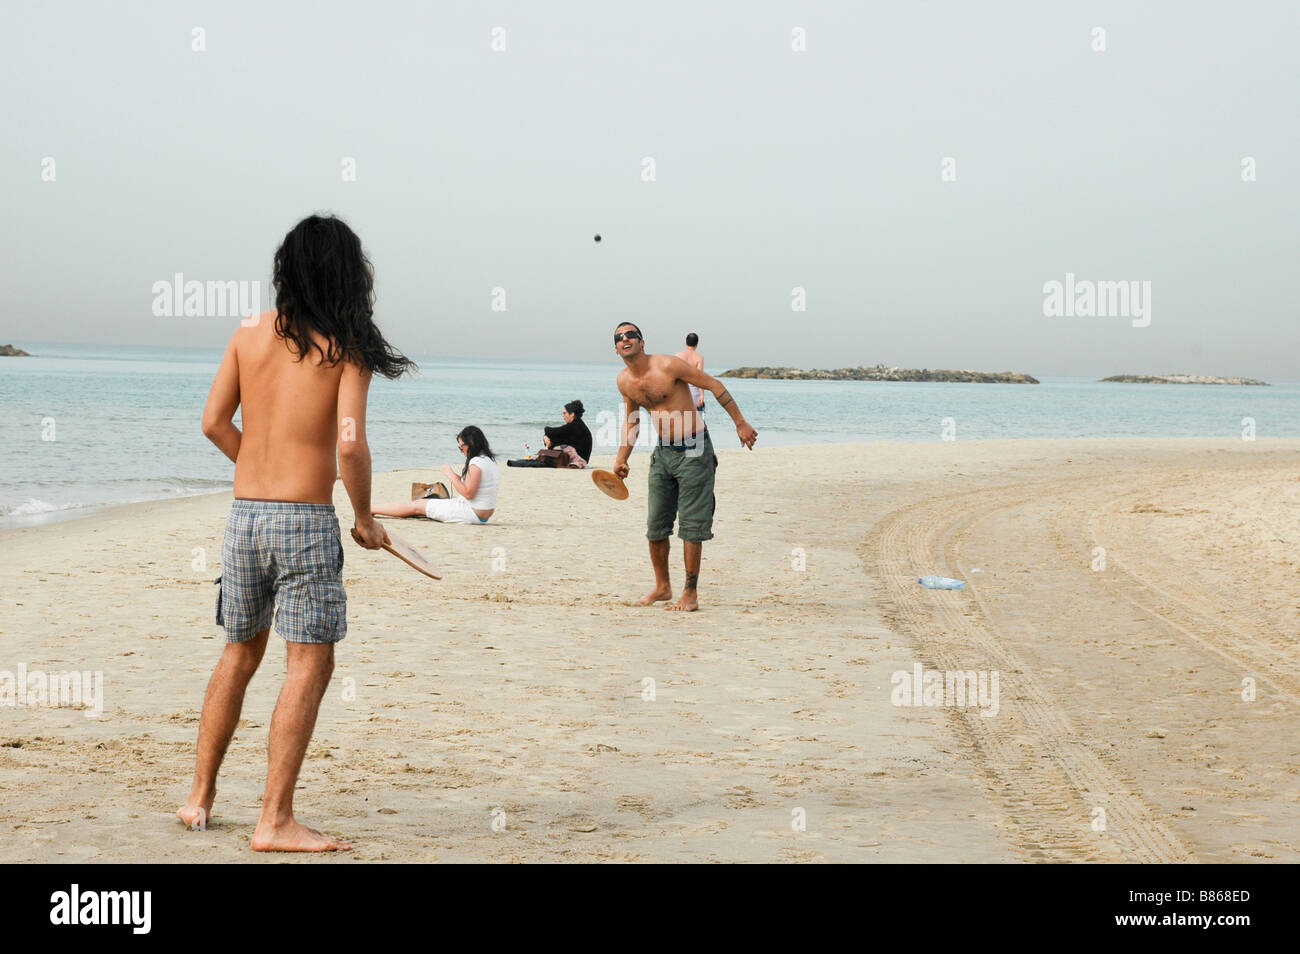 Israel Tel Aviv Two young men playing with a bat and ball AKA Matkot on the beach Stock Photo